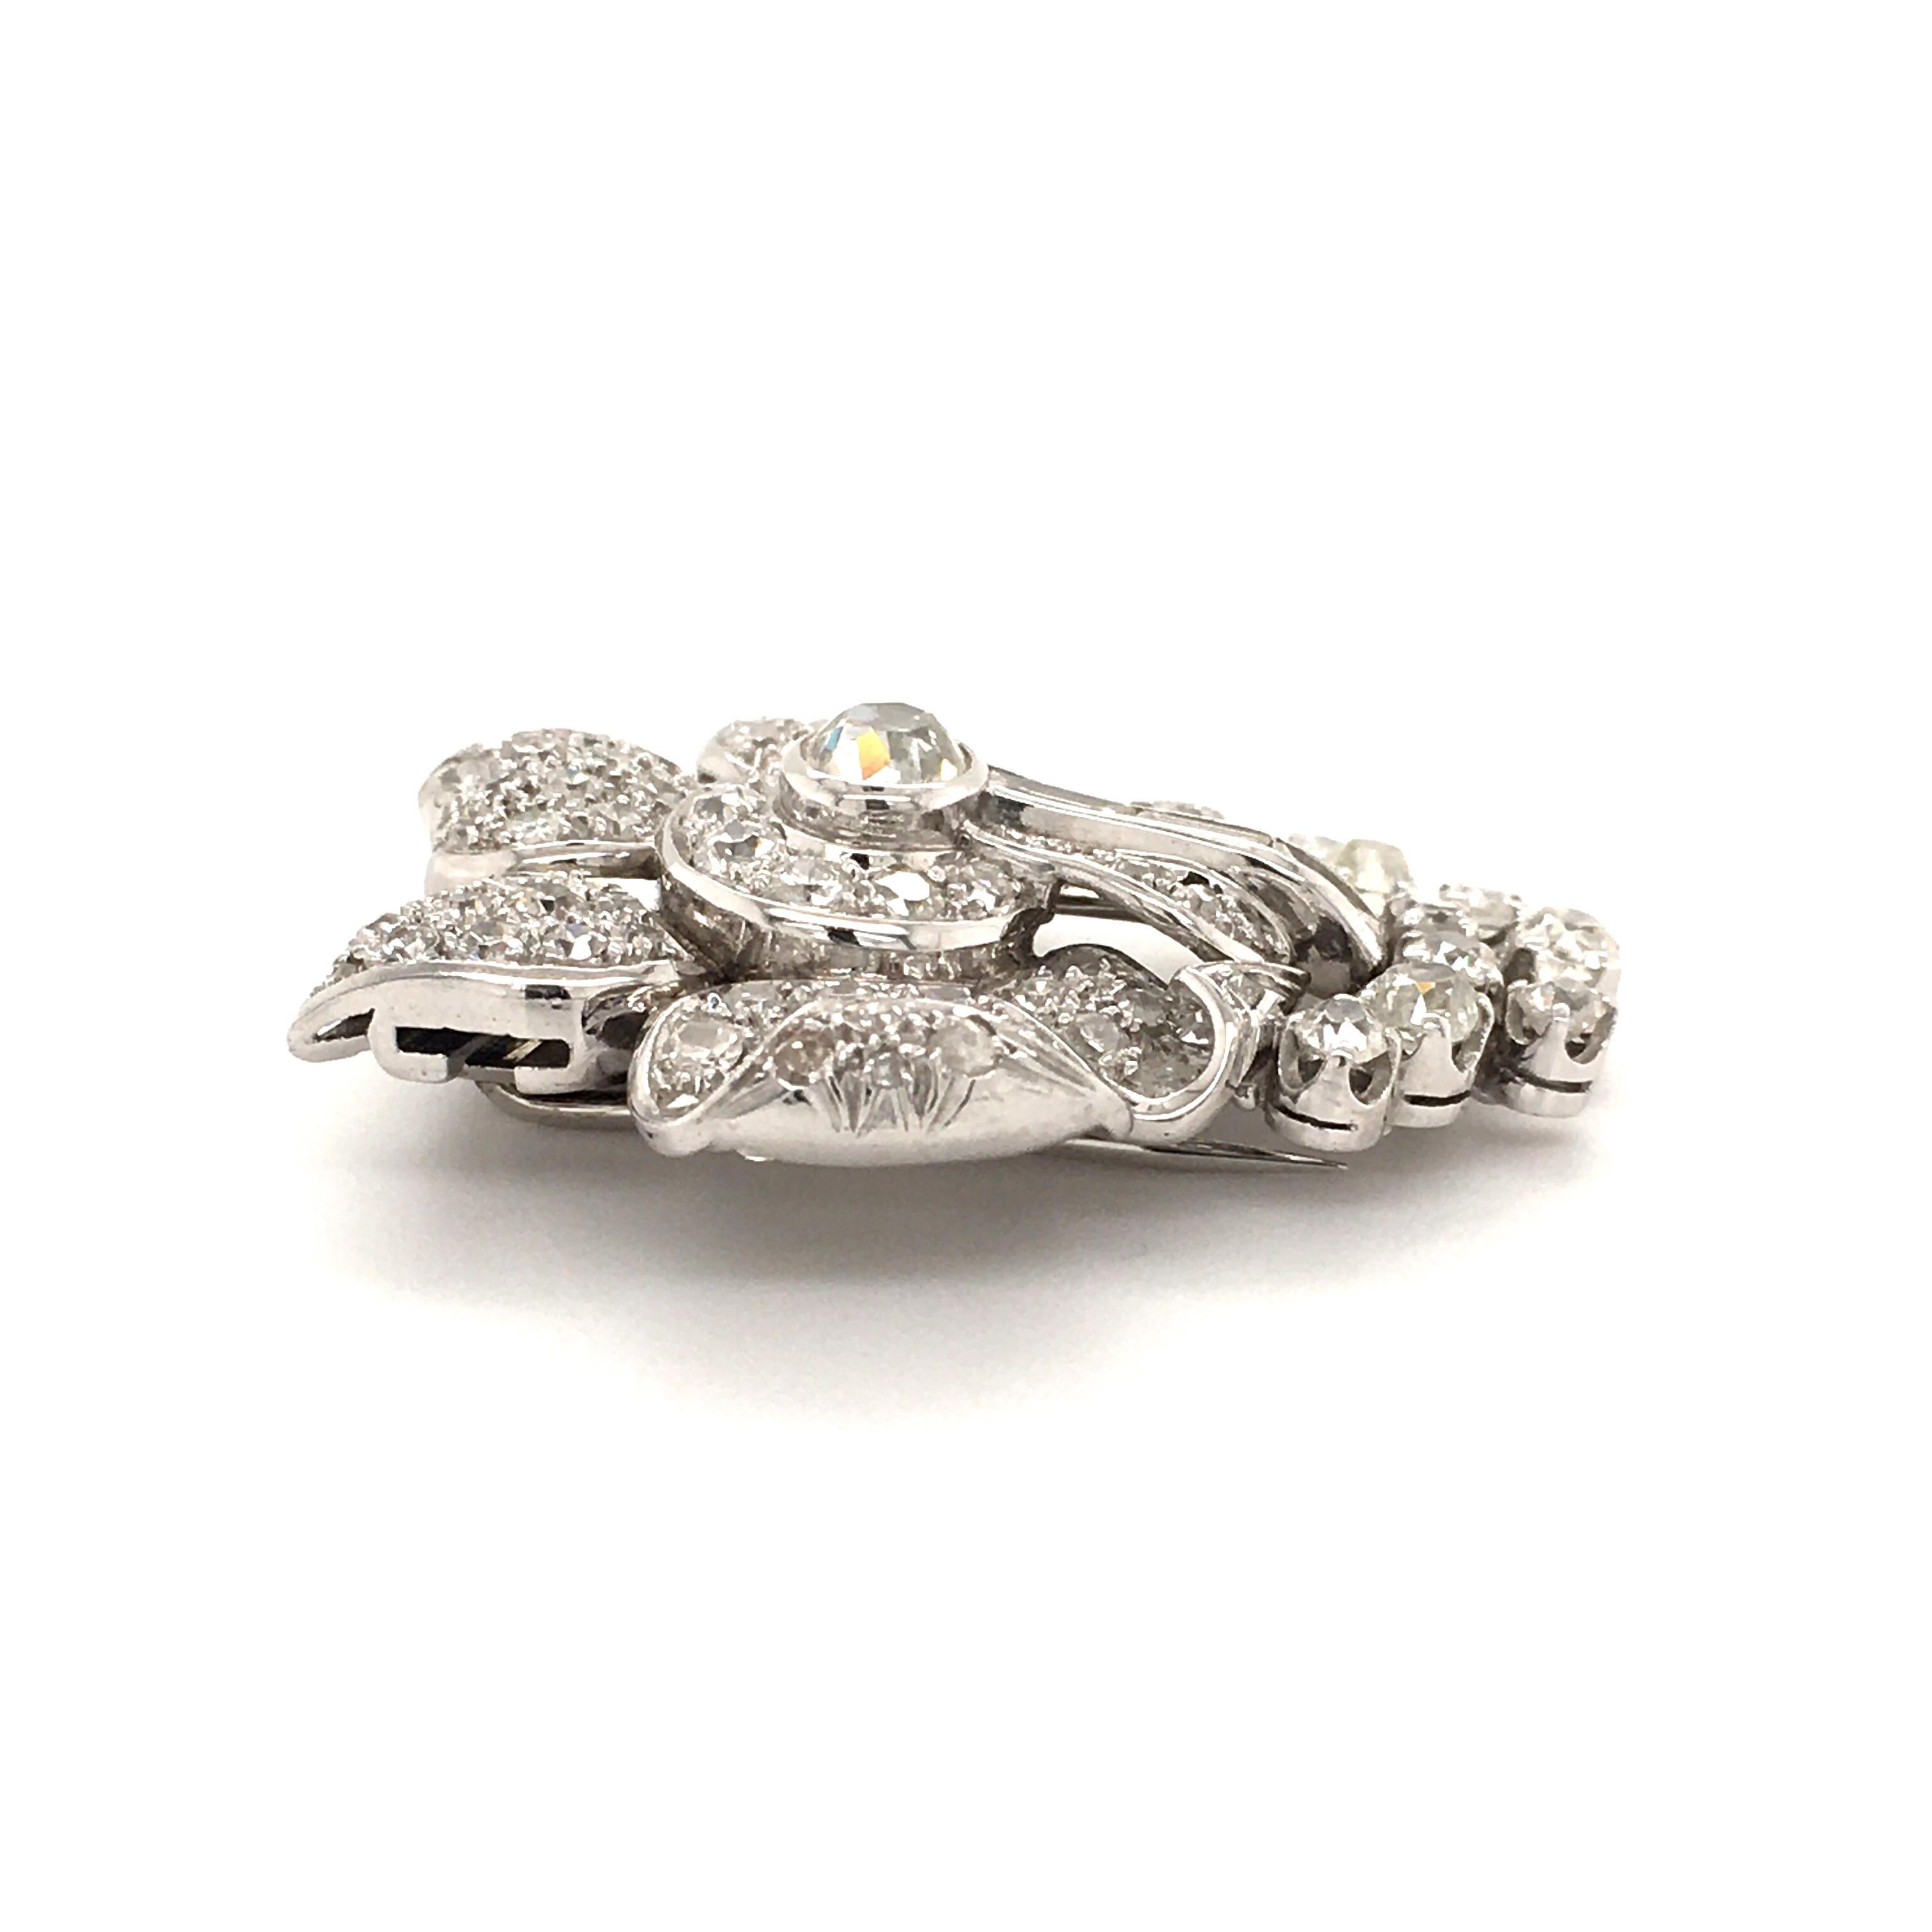 Old Mine Cut Flower Clip with Old Cut Diamonds in Platinum 950